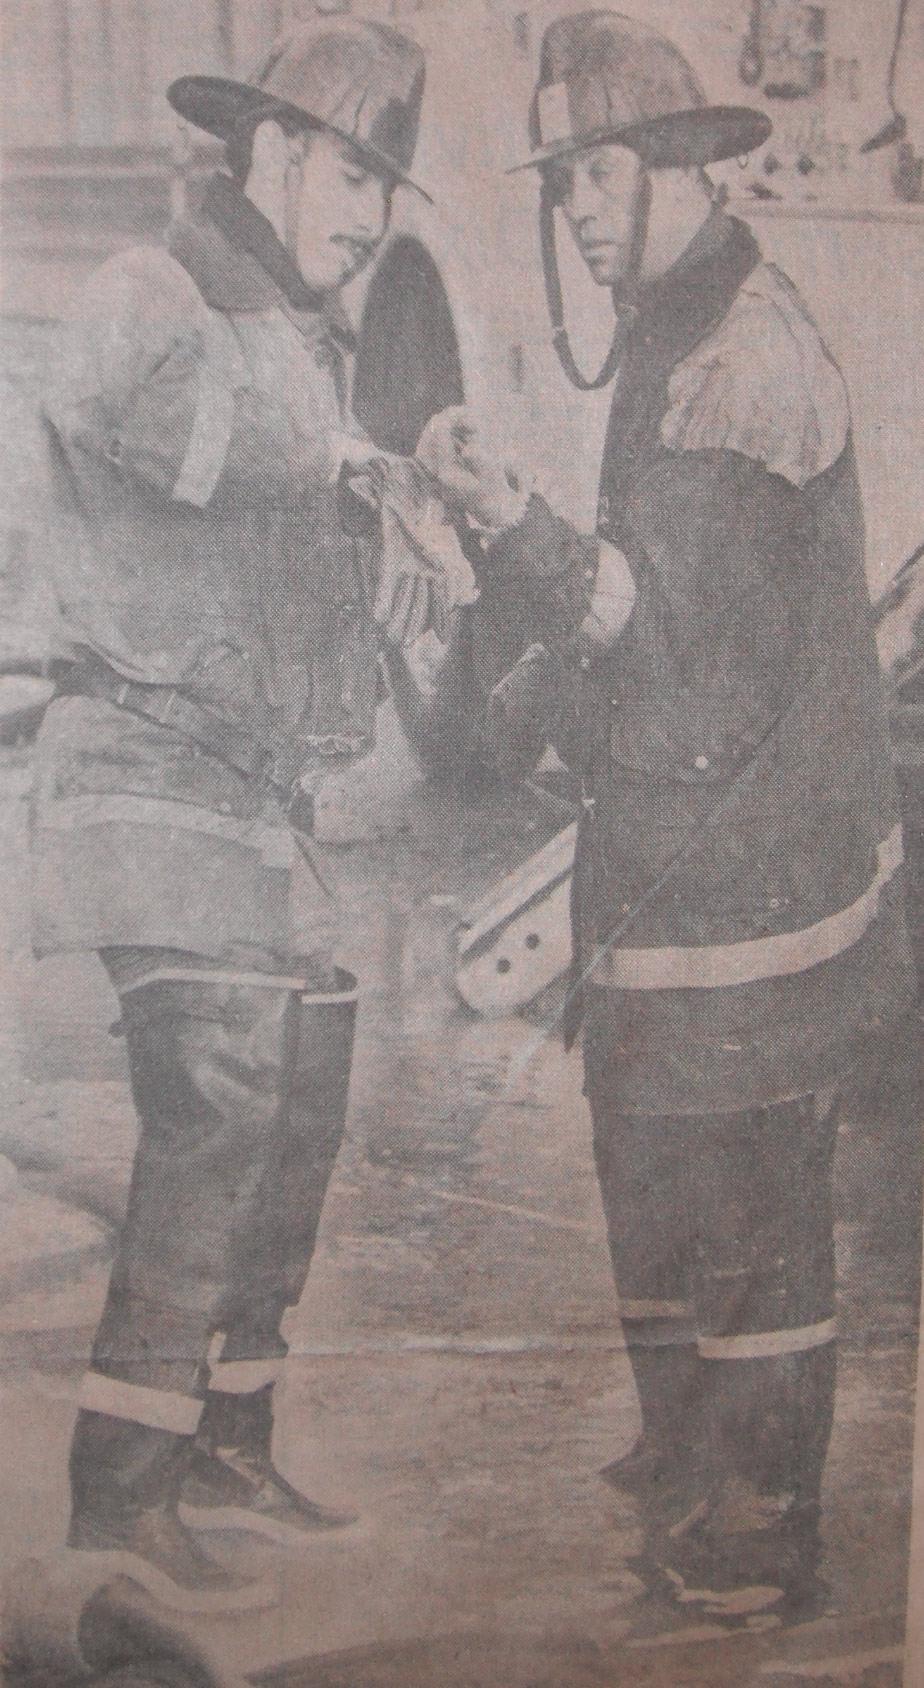 London Firemen Morley Hanes, left, and Don Varey stop for a moment to attend to an injury to Mr. Varey's hand. (photo by Rick Eglington of The London Free Press)